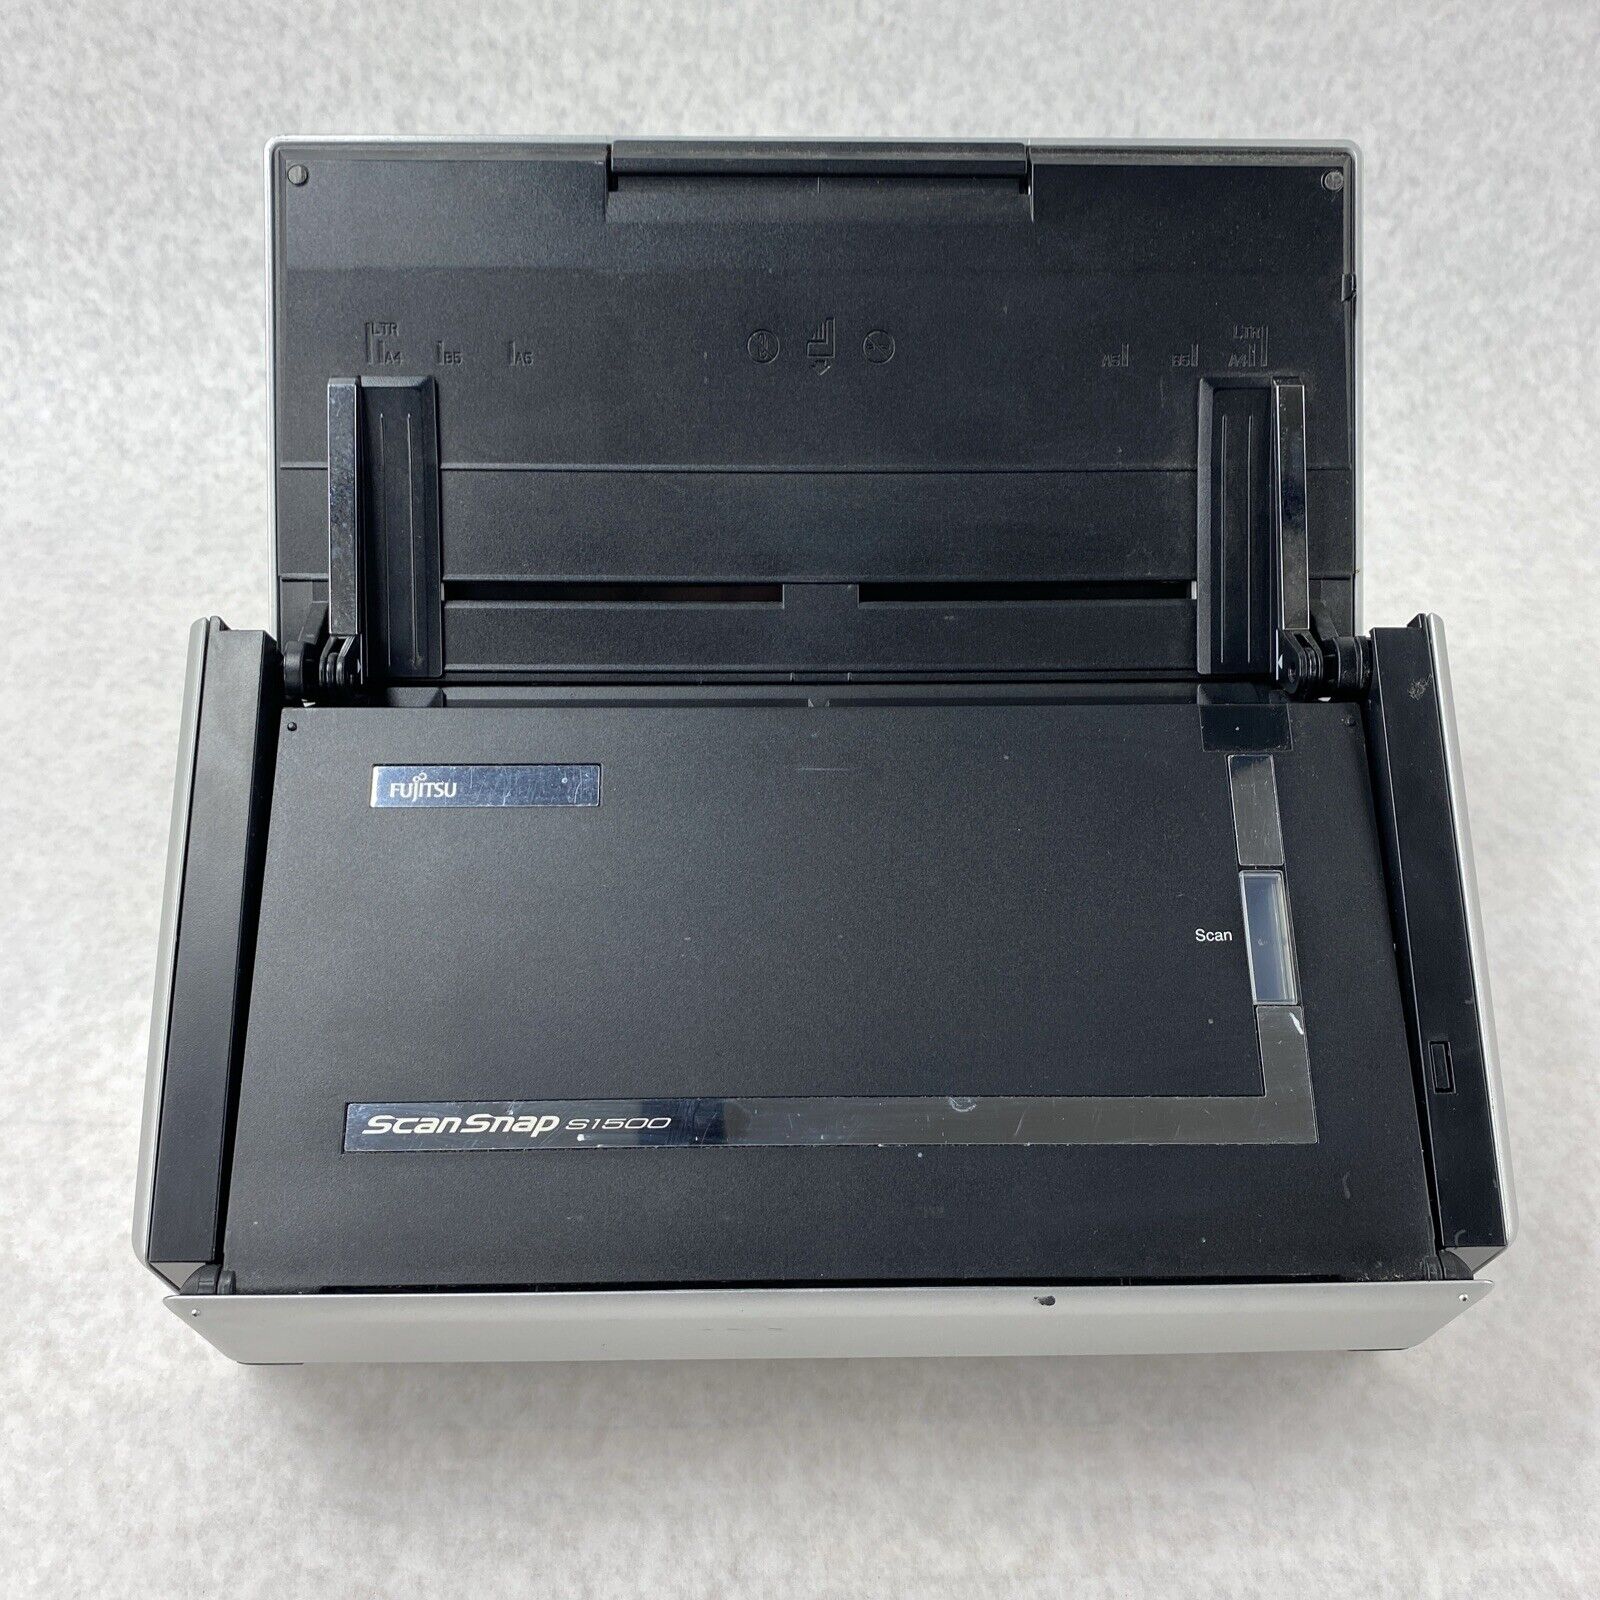 Fujitsu ScanSnap S1500 Duplex Sheetfed Color Image Scanner No AC Adapter